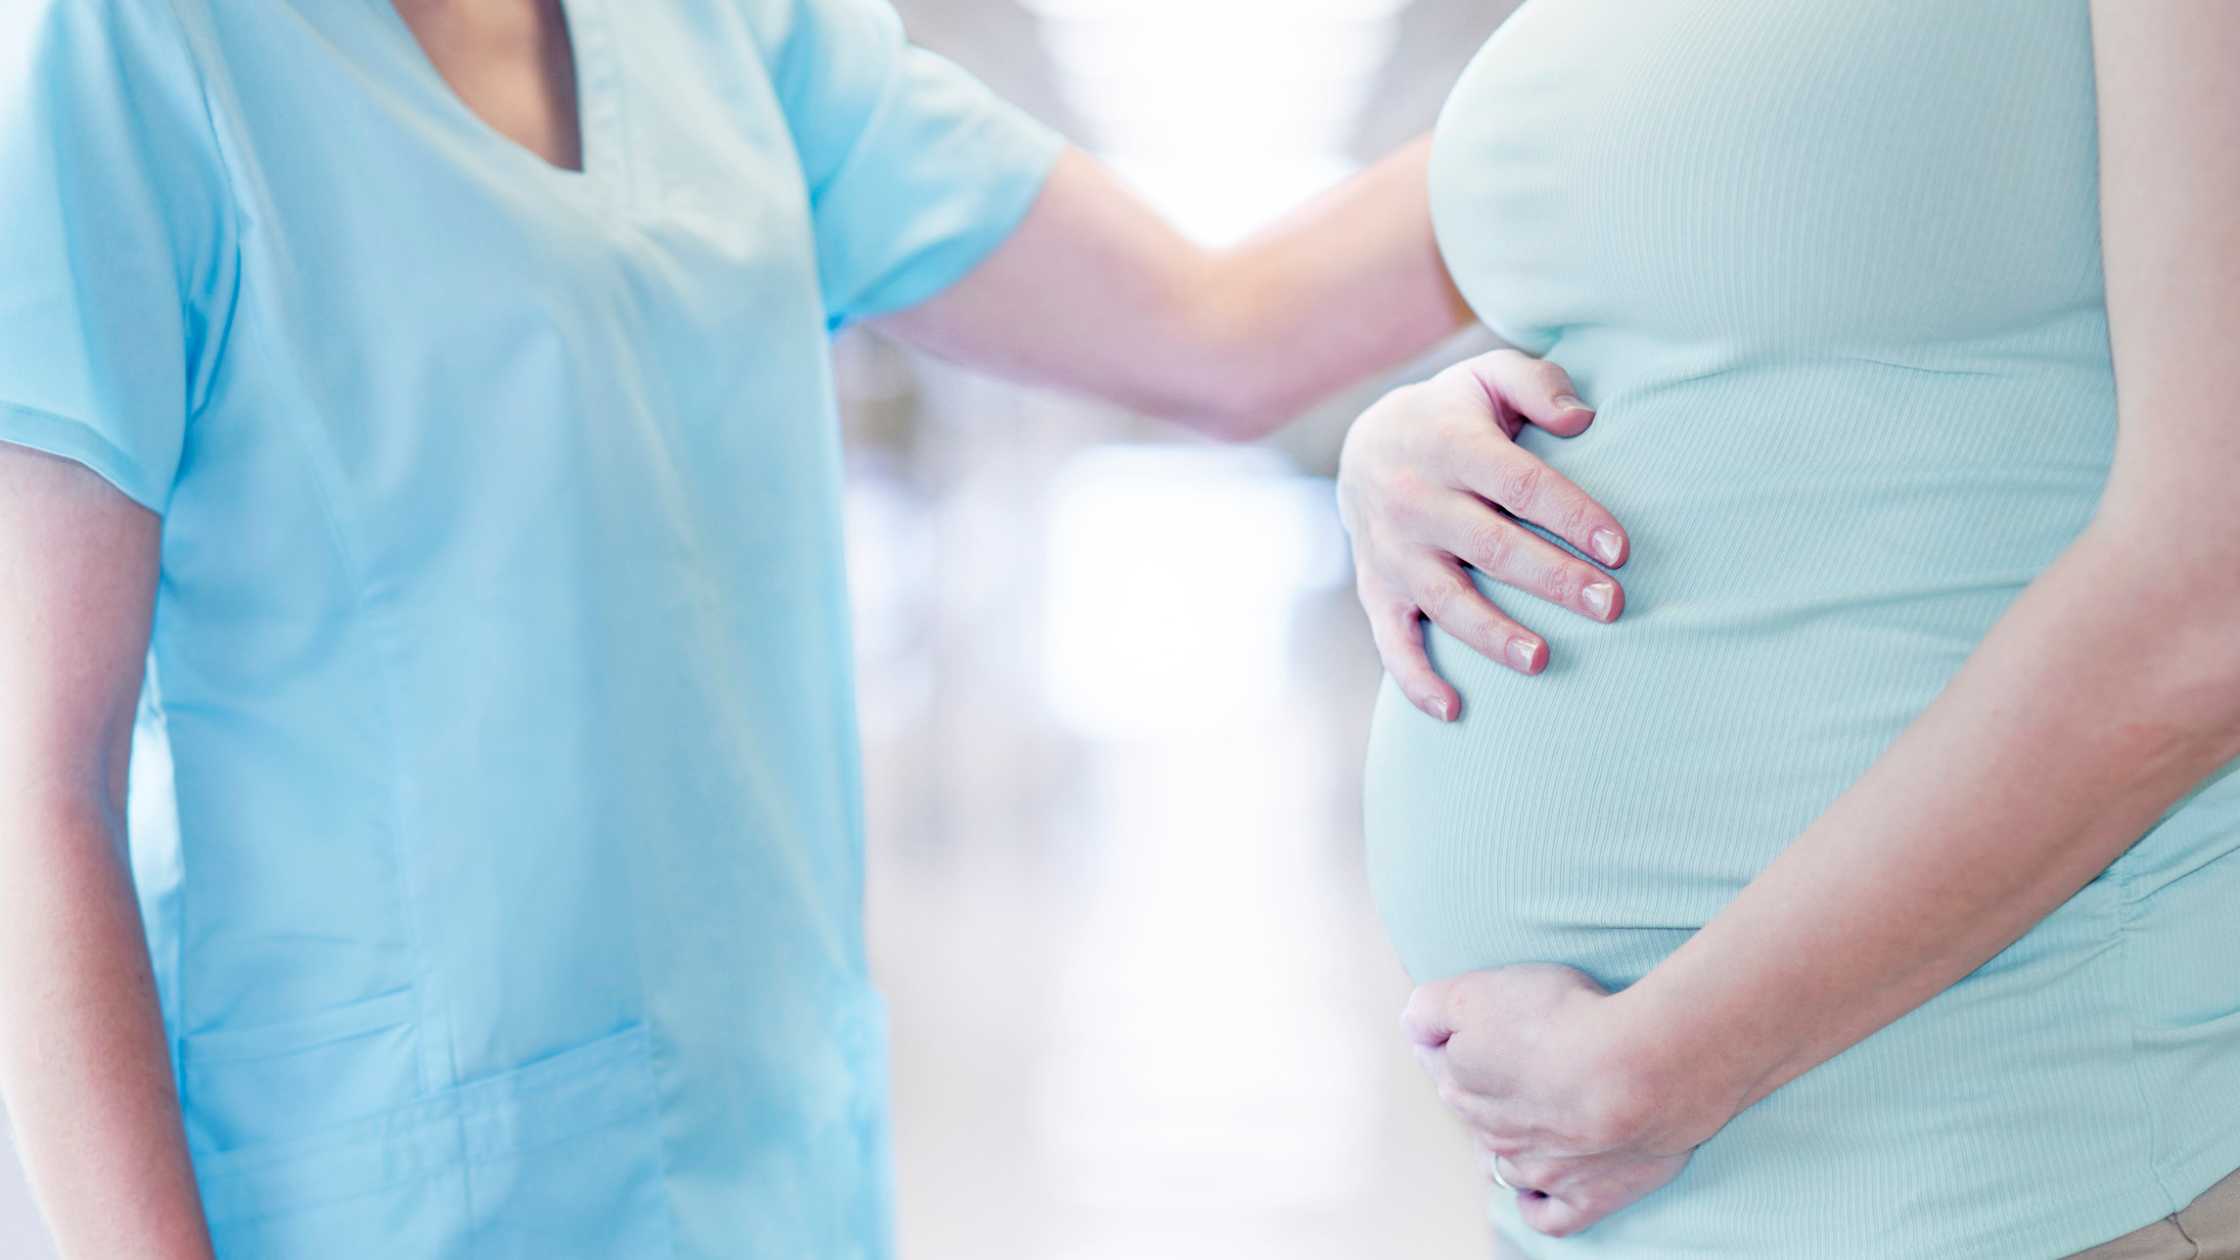 How to Become a Certified Nurse Midwife